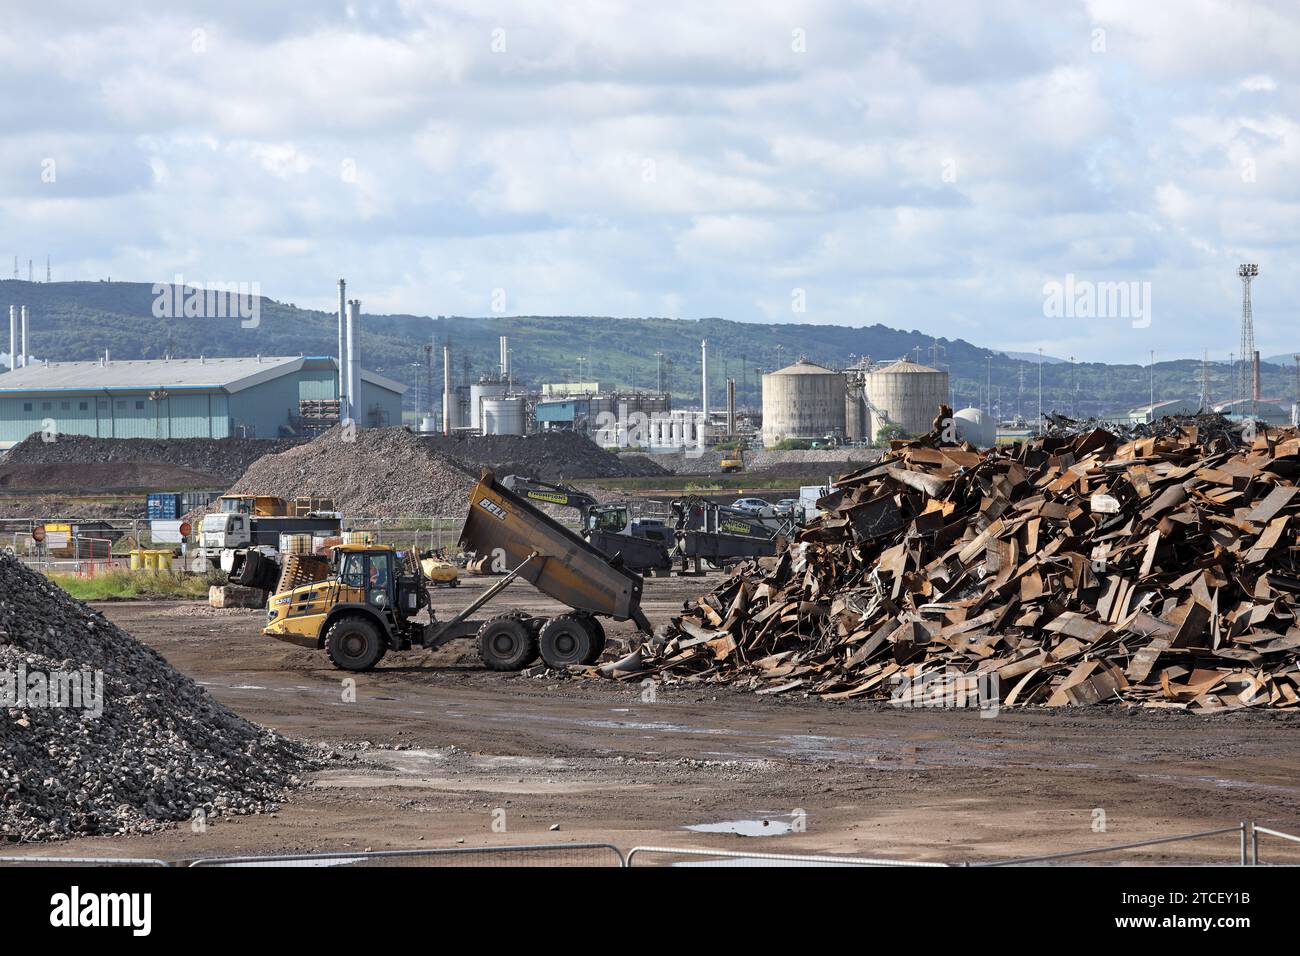 Scrap metal piled up on the site of the old Redcar Steelworks which is being demolished to make way for the development of the Teesworks carbon emissi Stock Photo